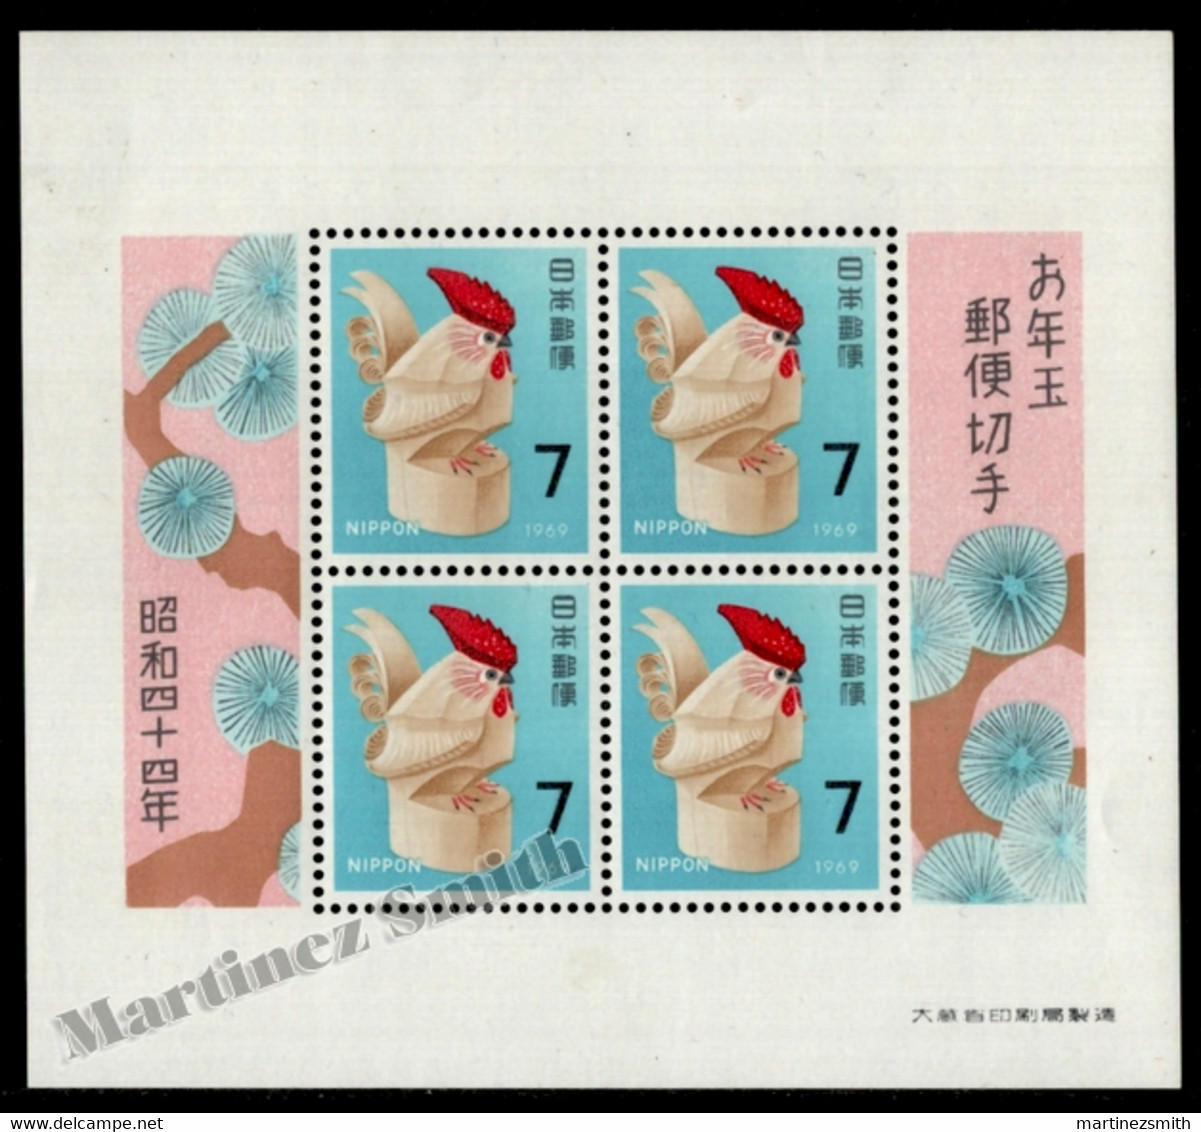 Japon - Japan 1968 Yvert BF 64, New Year, Lunar Year Of The Rooster - Miniature Sheet - MNH - Blocs-feuillets